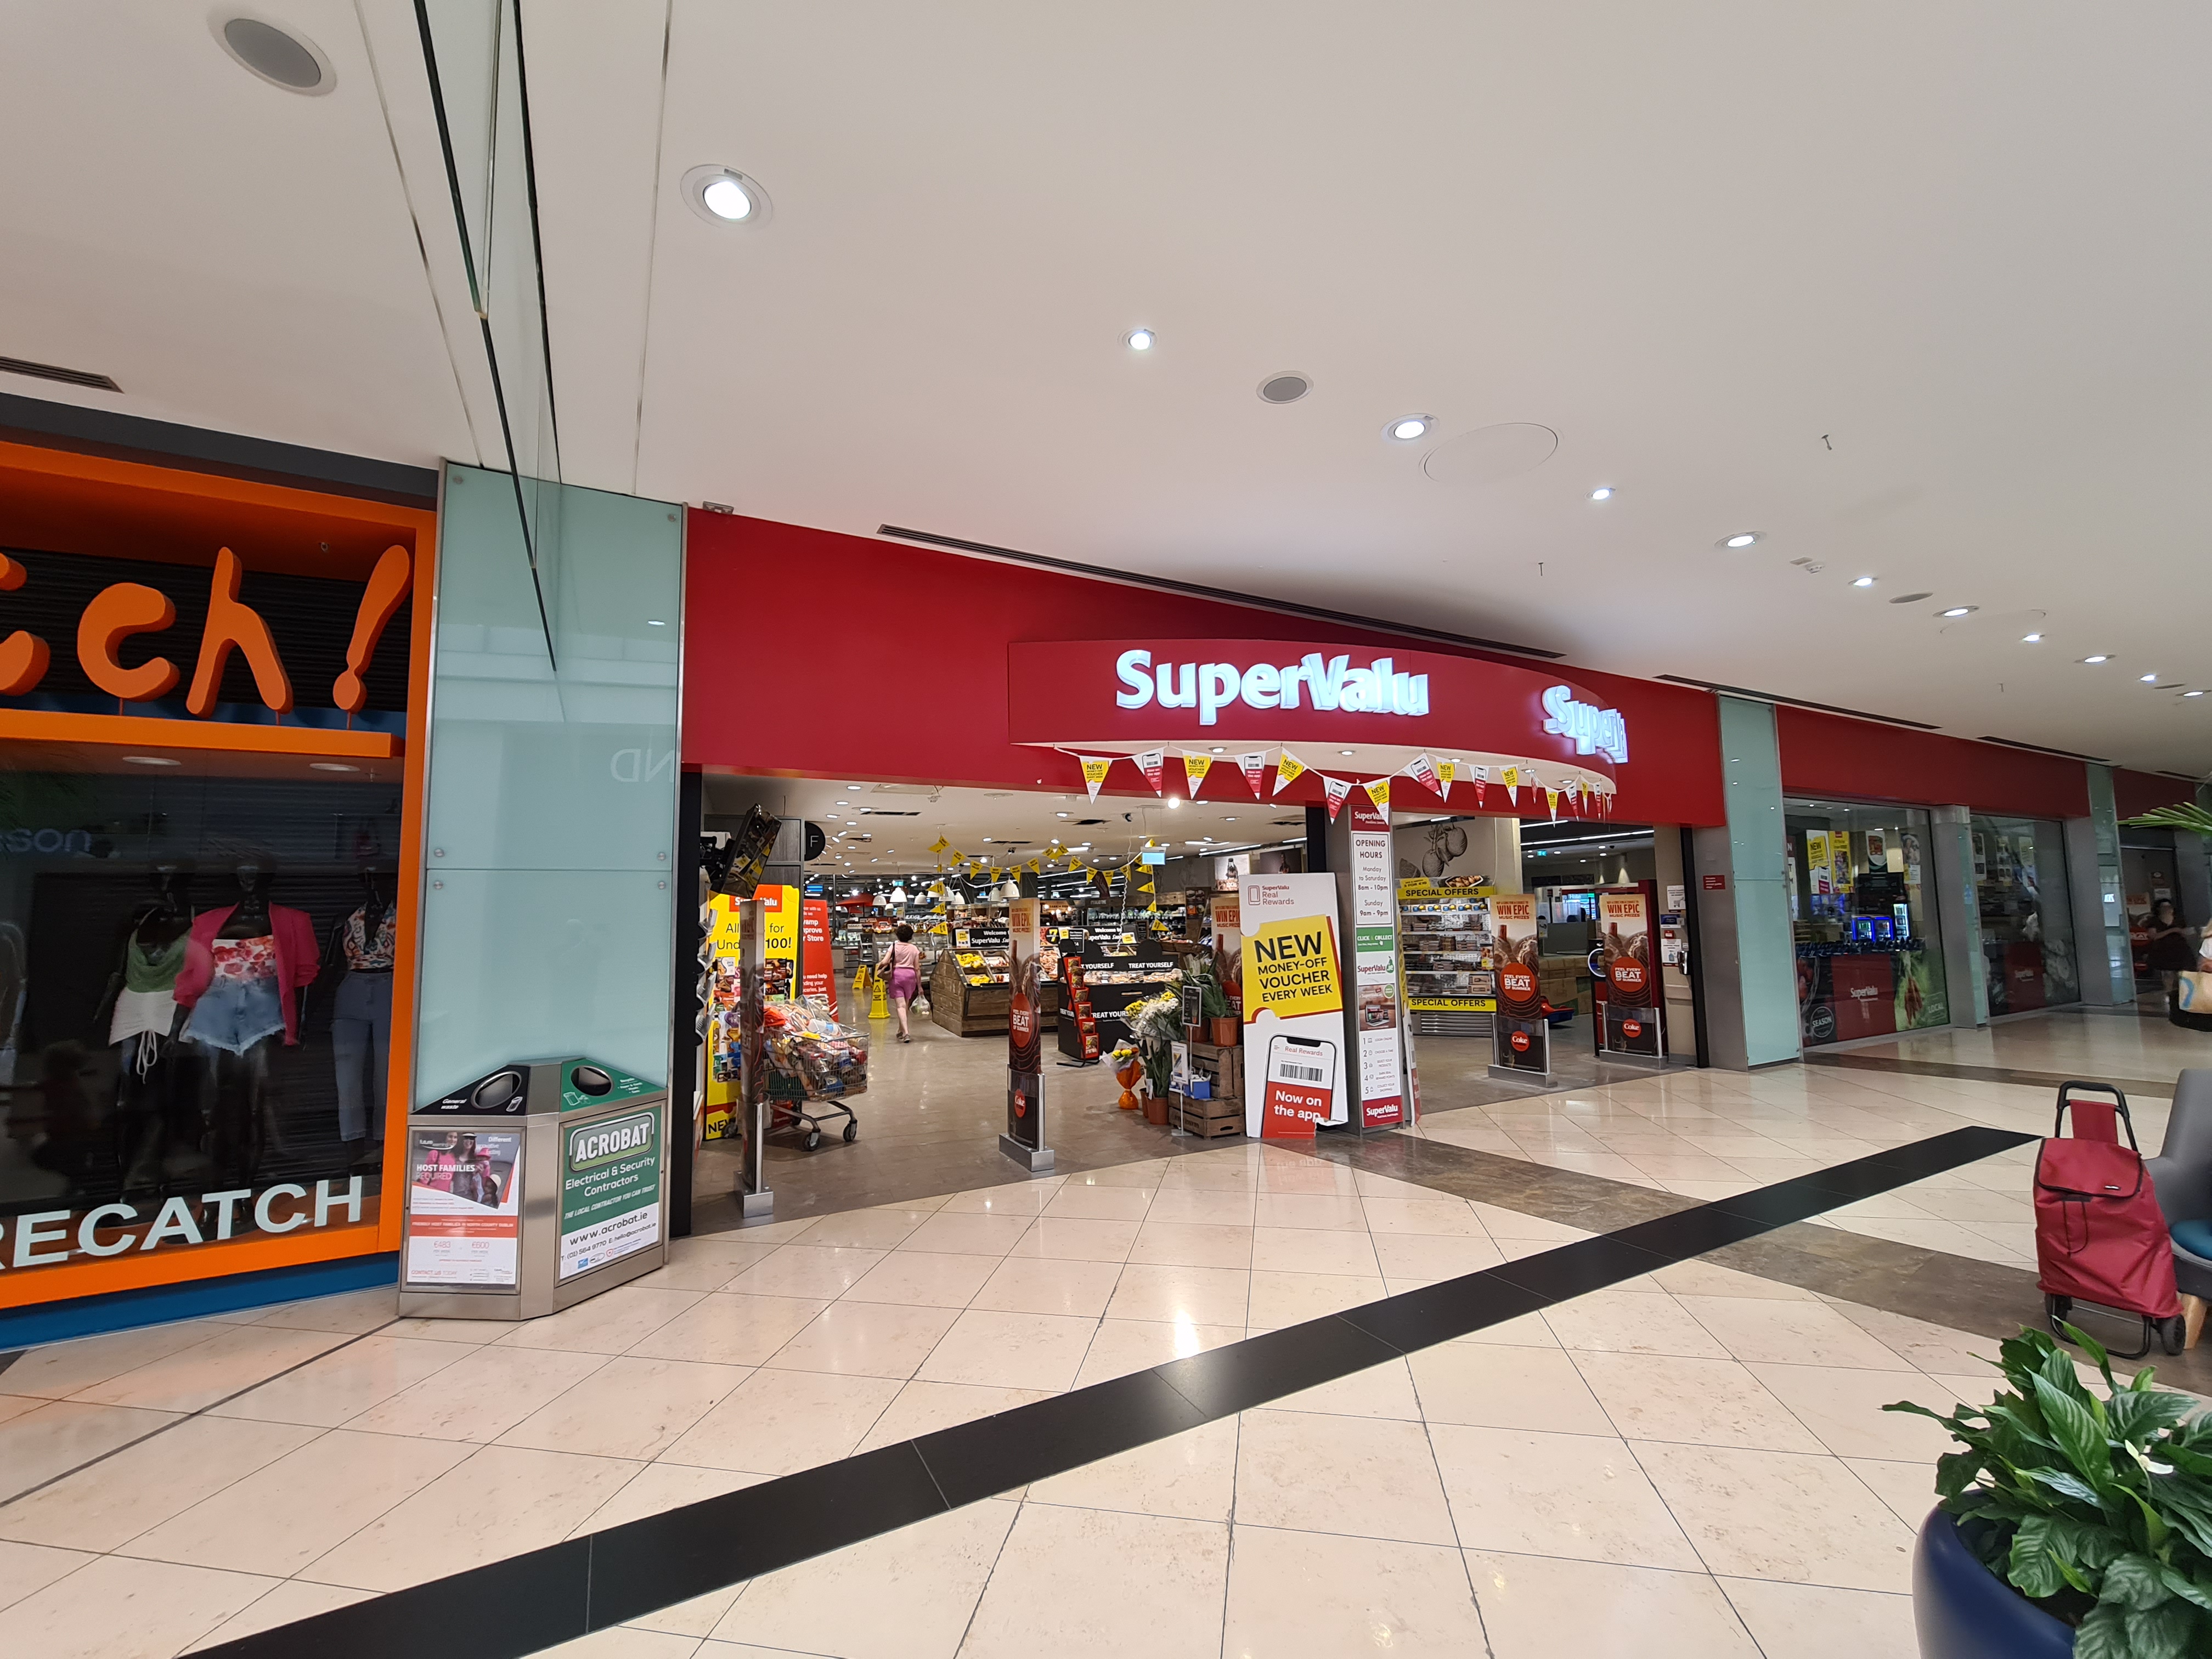 M&E Contract awarded for  the Supervalu Store  in Swords